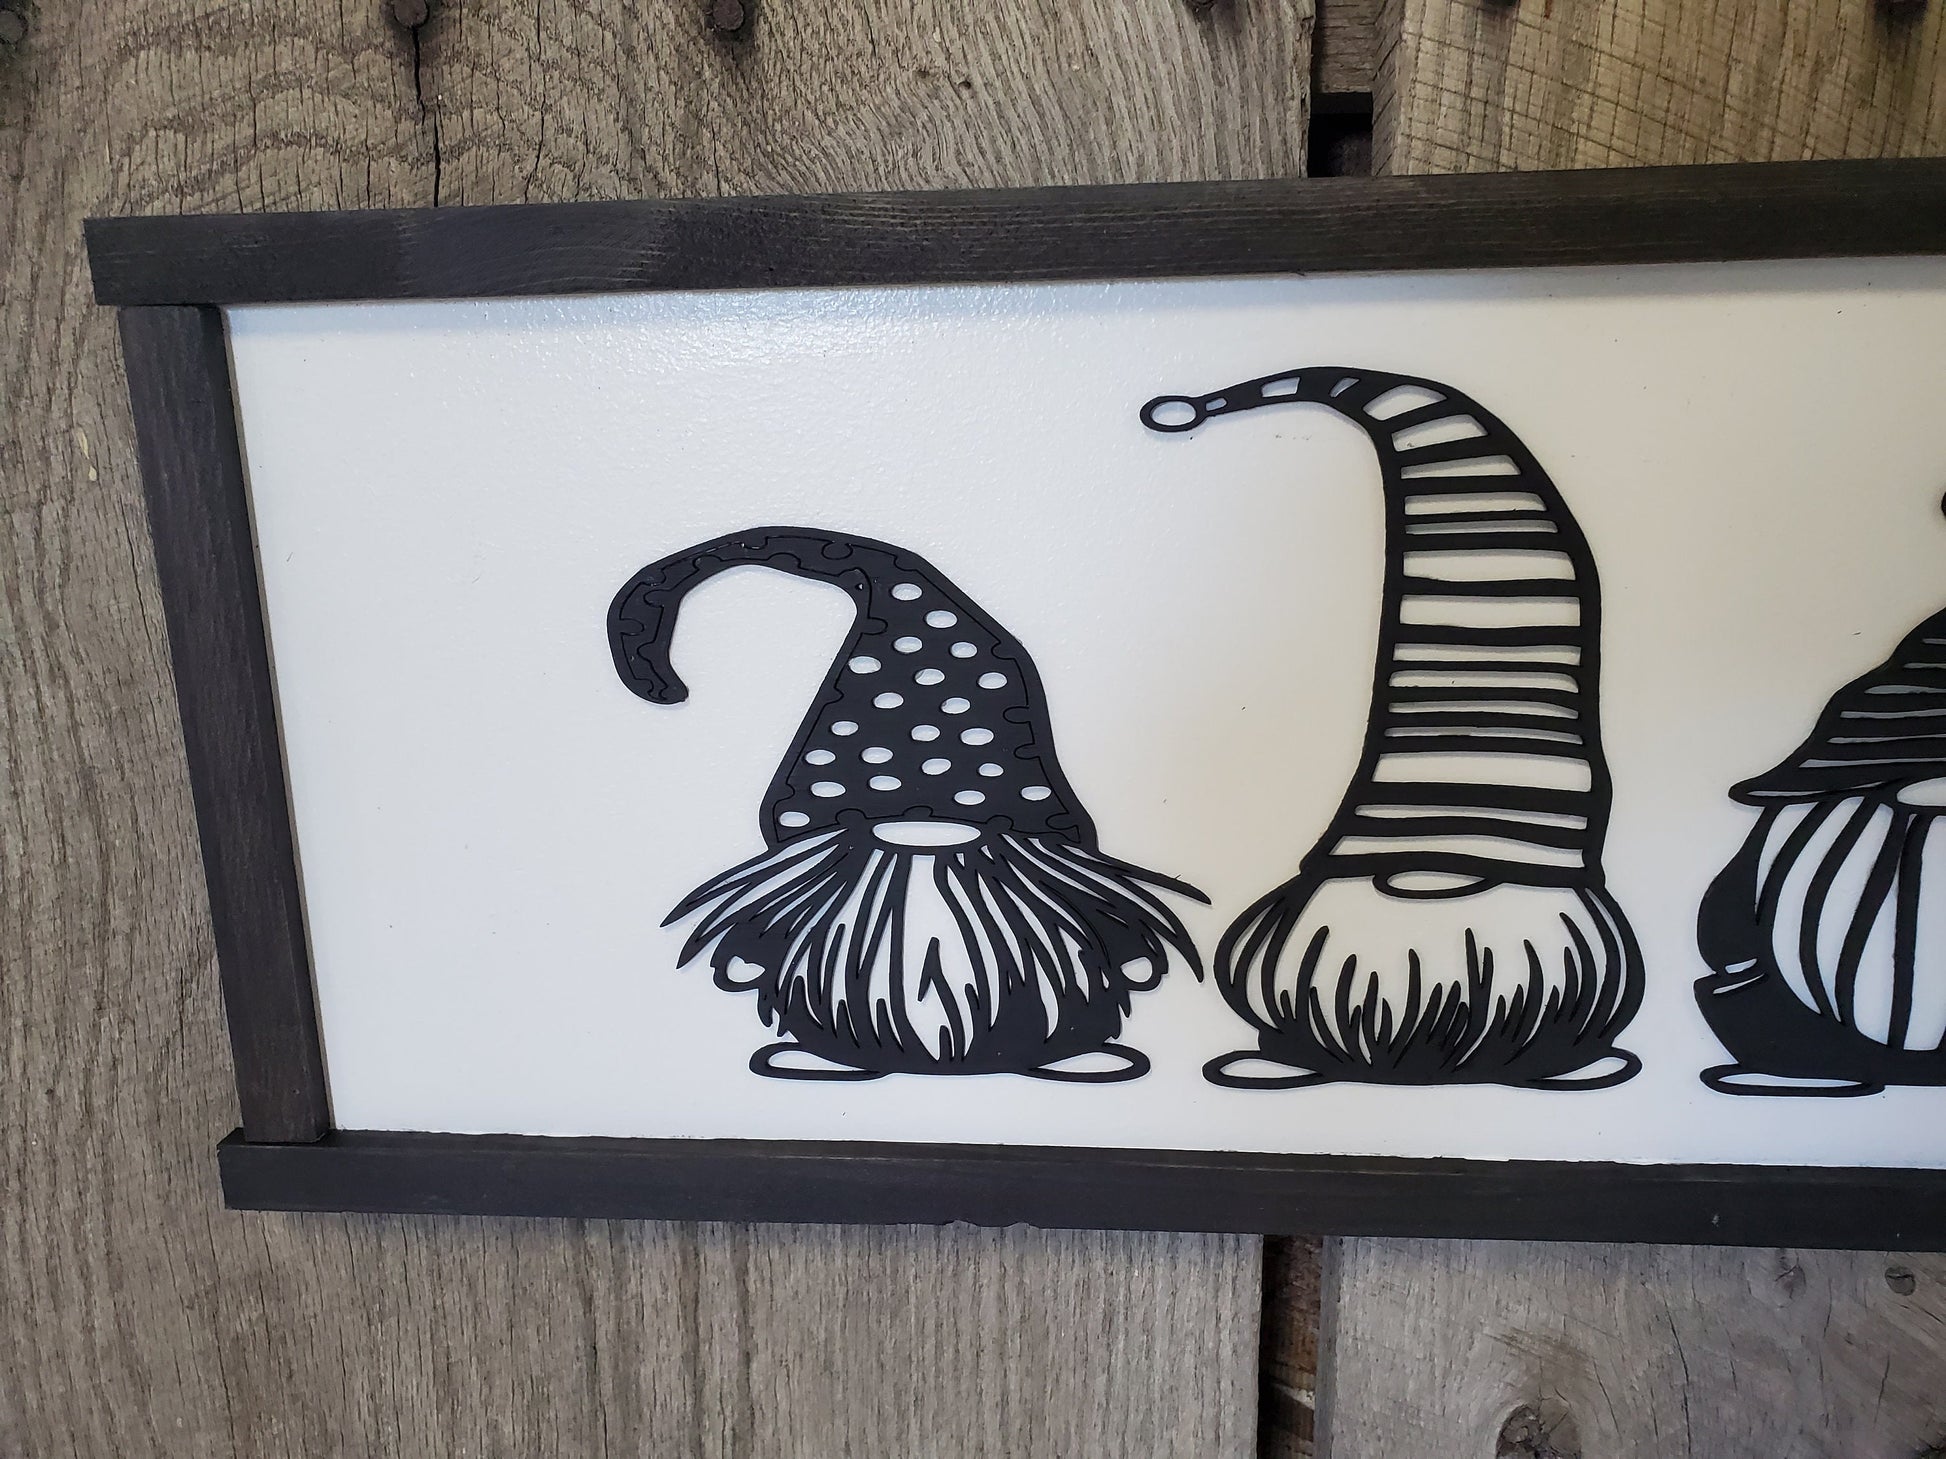 Gnome Garden Gnomes Elves Dwarf Silhouette Line Art 3D Raised Text Sign Rustic Farmhouse Shabby Chic Wood White and Black